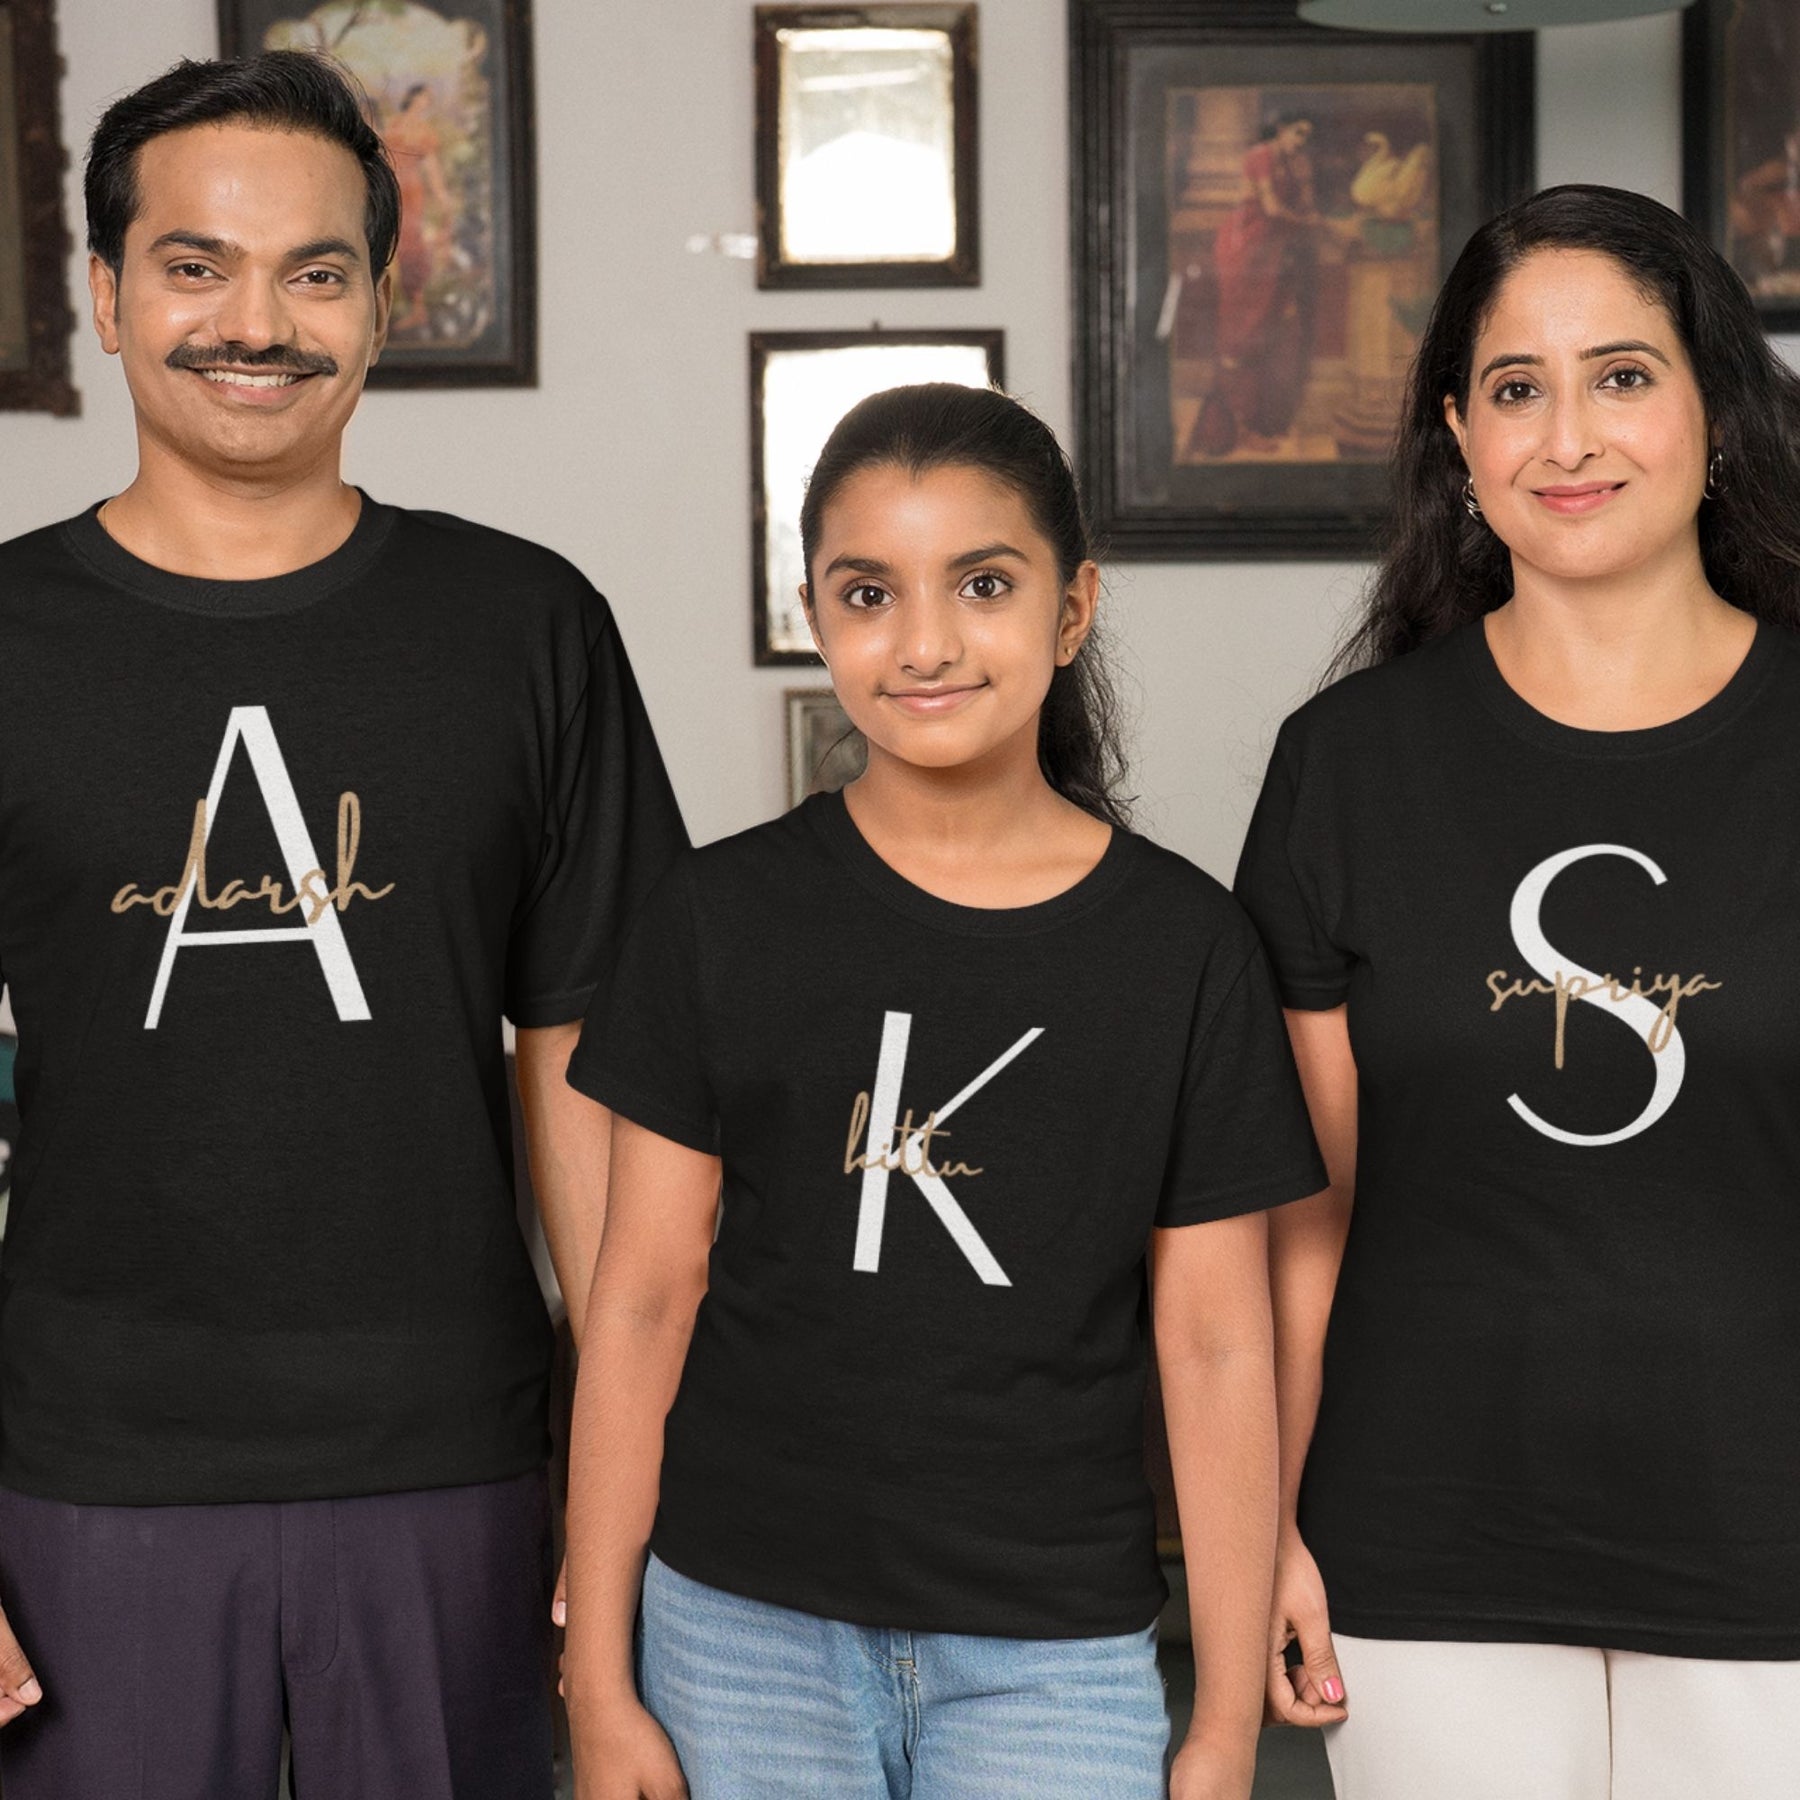 personalized-name-matching-family-black-t-shirts-for-mom-dad-son-daughter-gogirgit-com